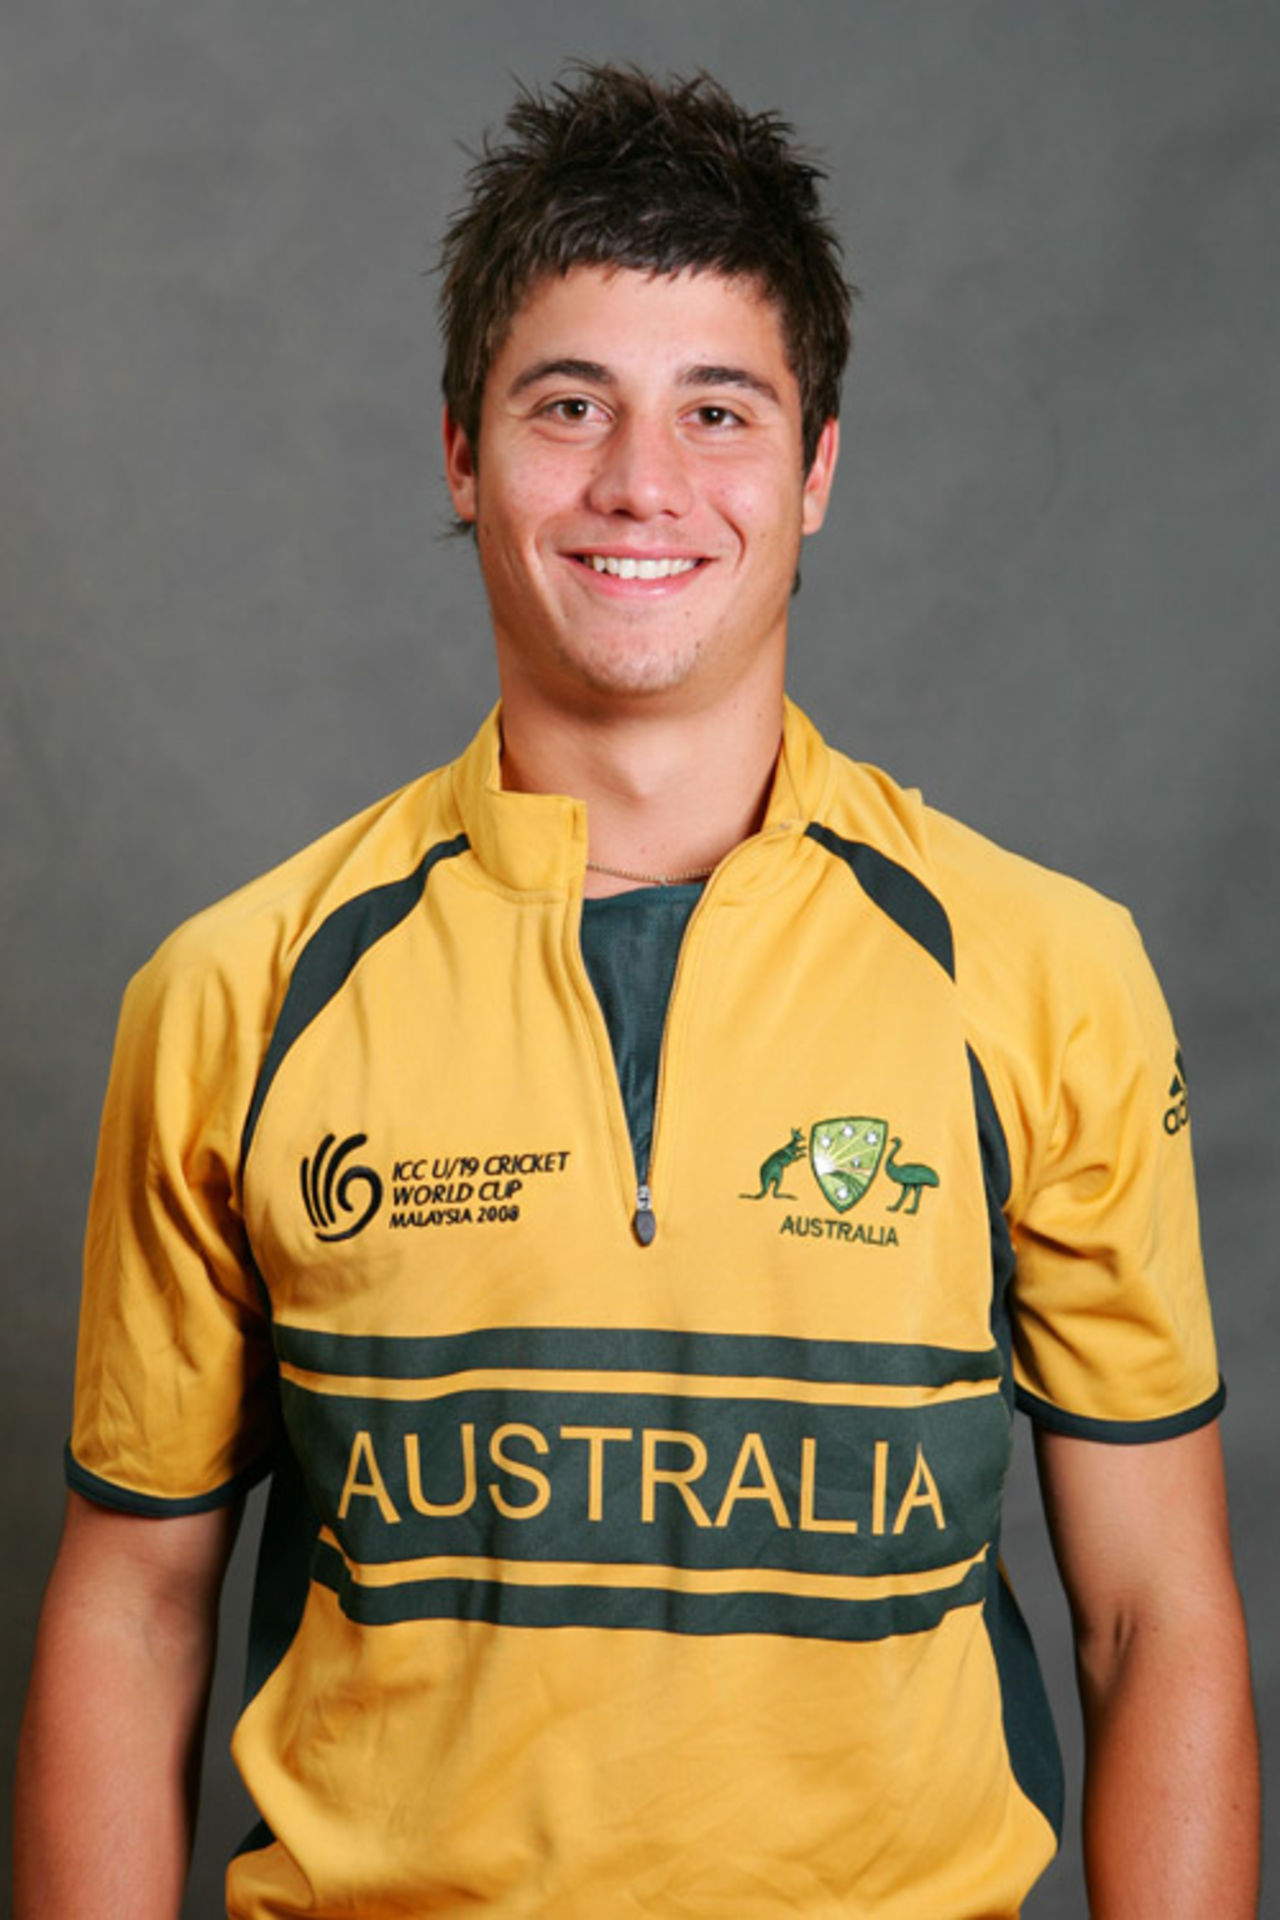 Marcus Stoinis profile picture, February 13, 2008 

